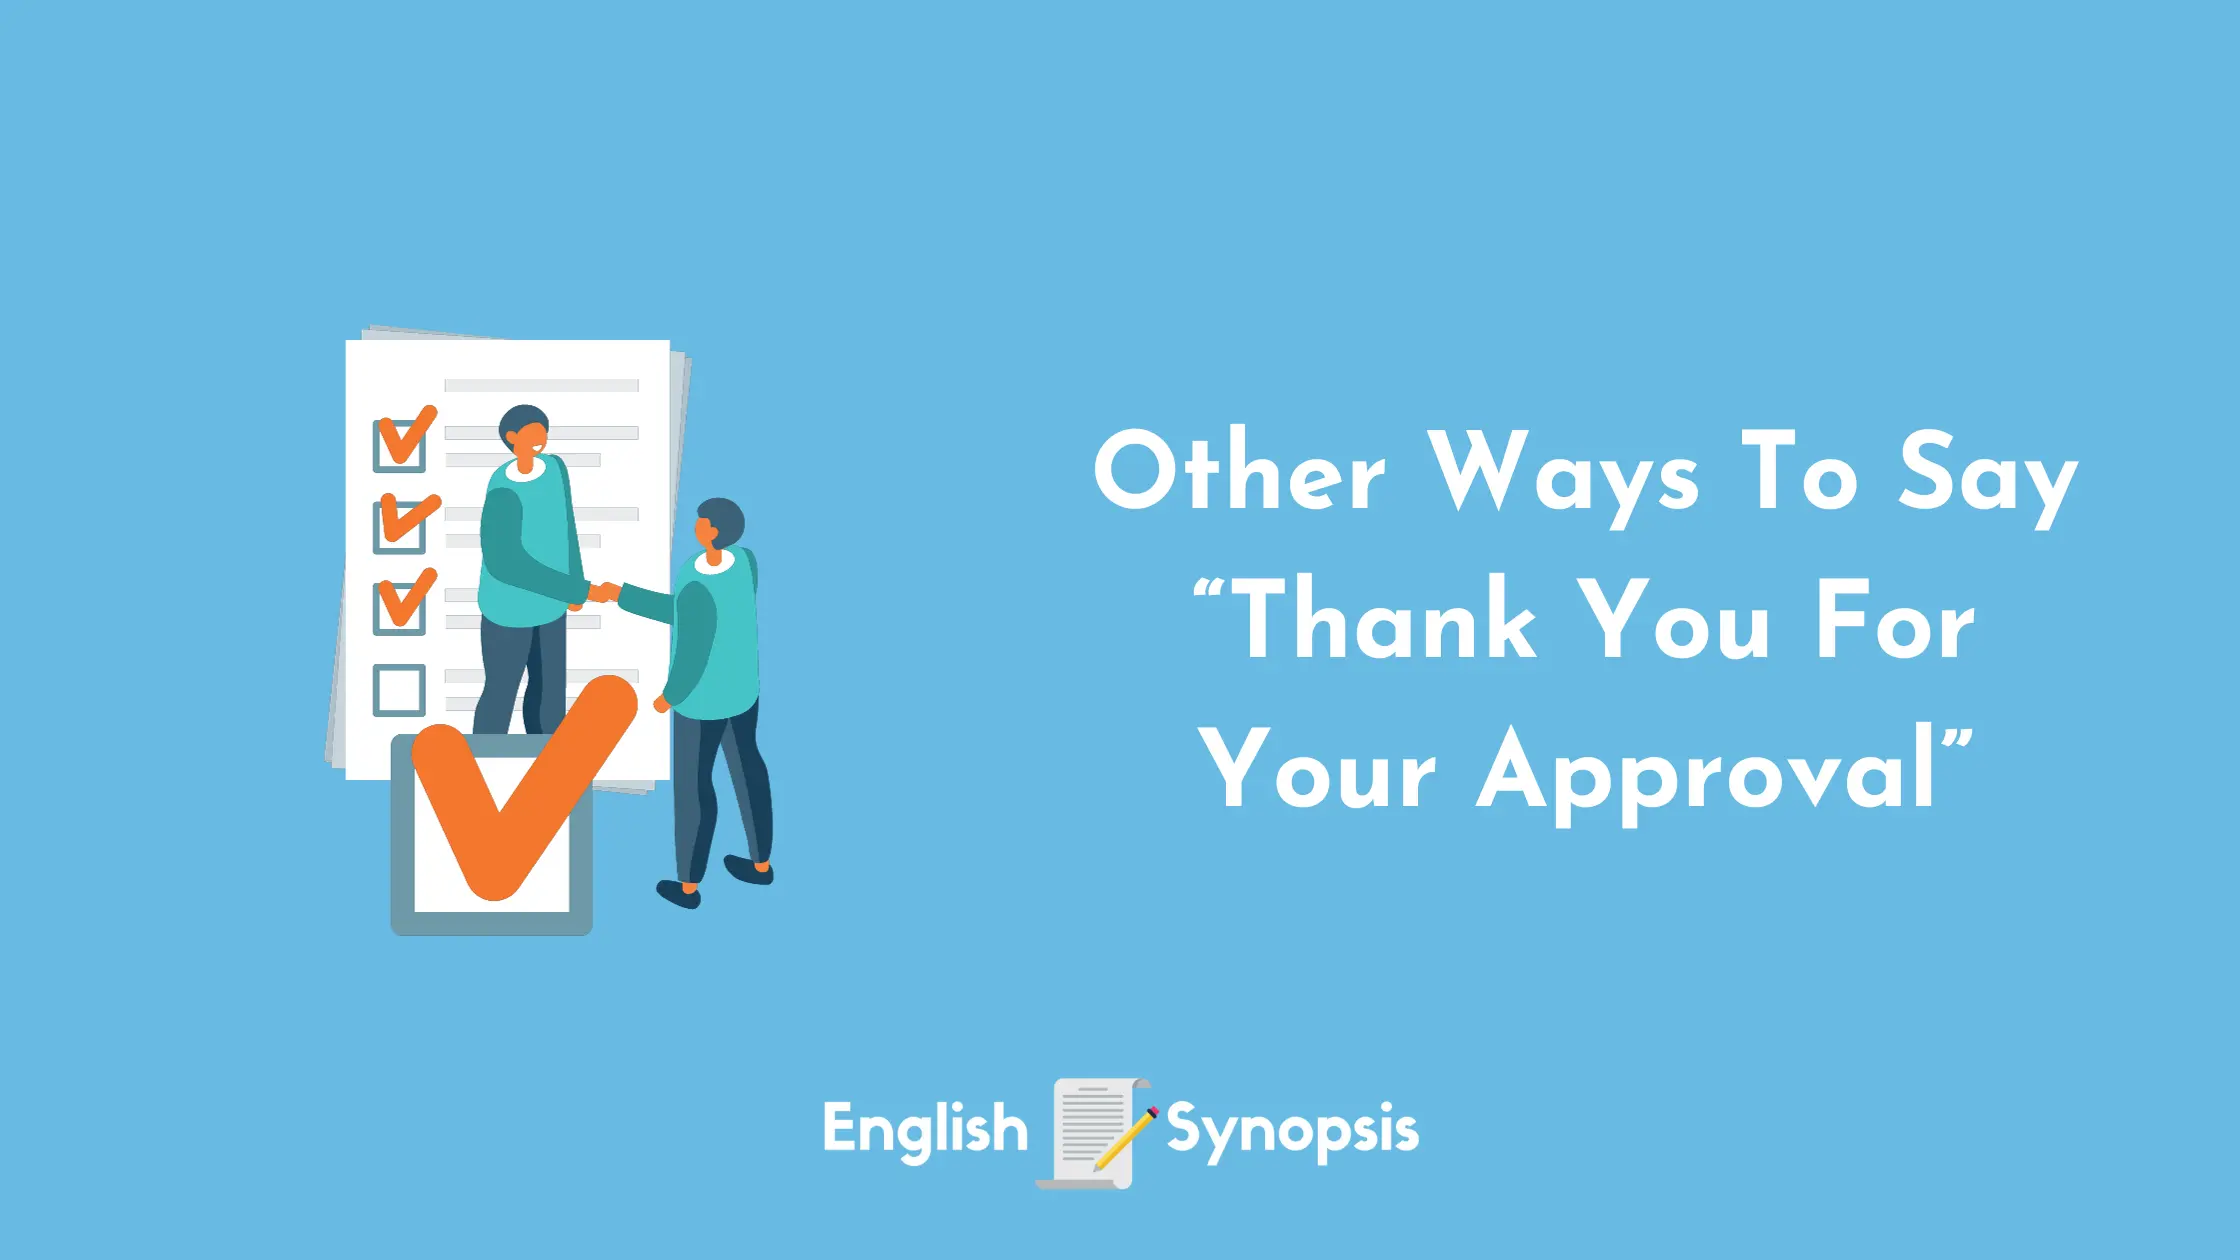 Other Ways To Say "Thank You For Your Approval"